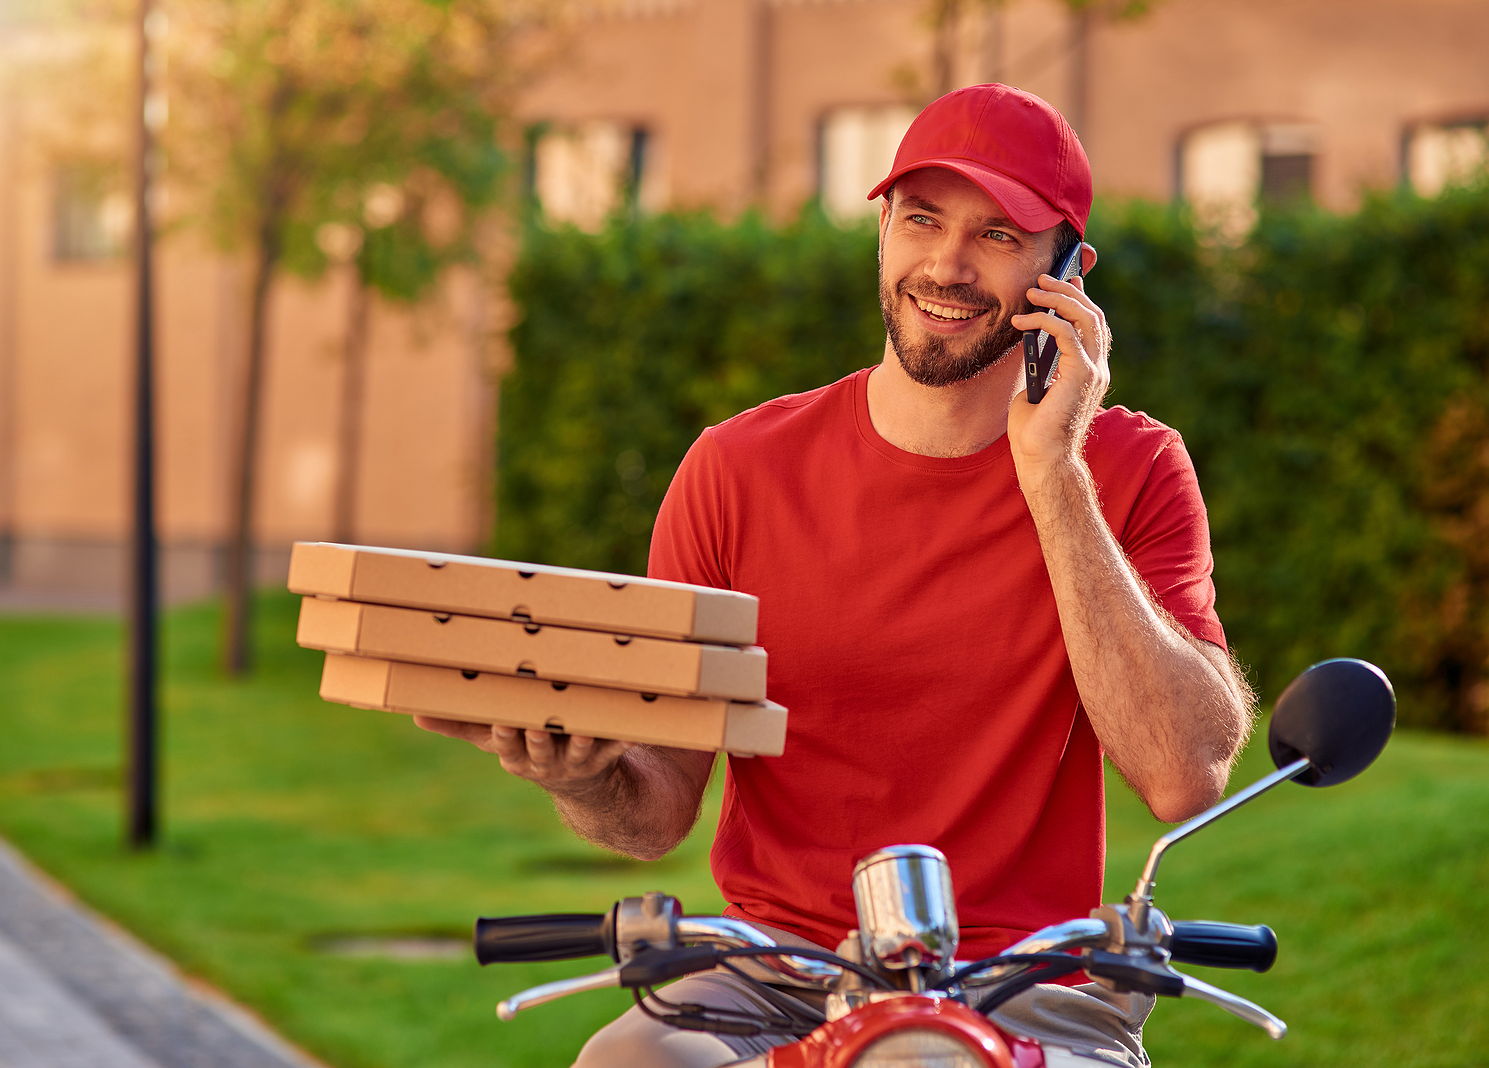 A delivery worker in uniform making a phone call on his bike with 3 pizza boxes in hand.